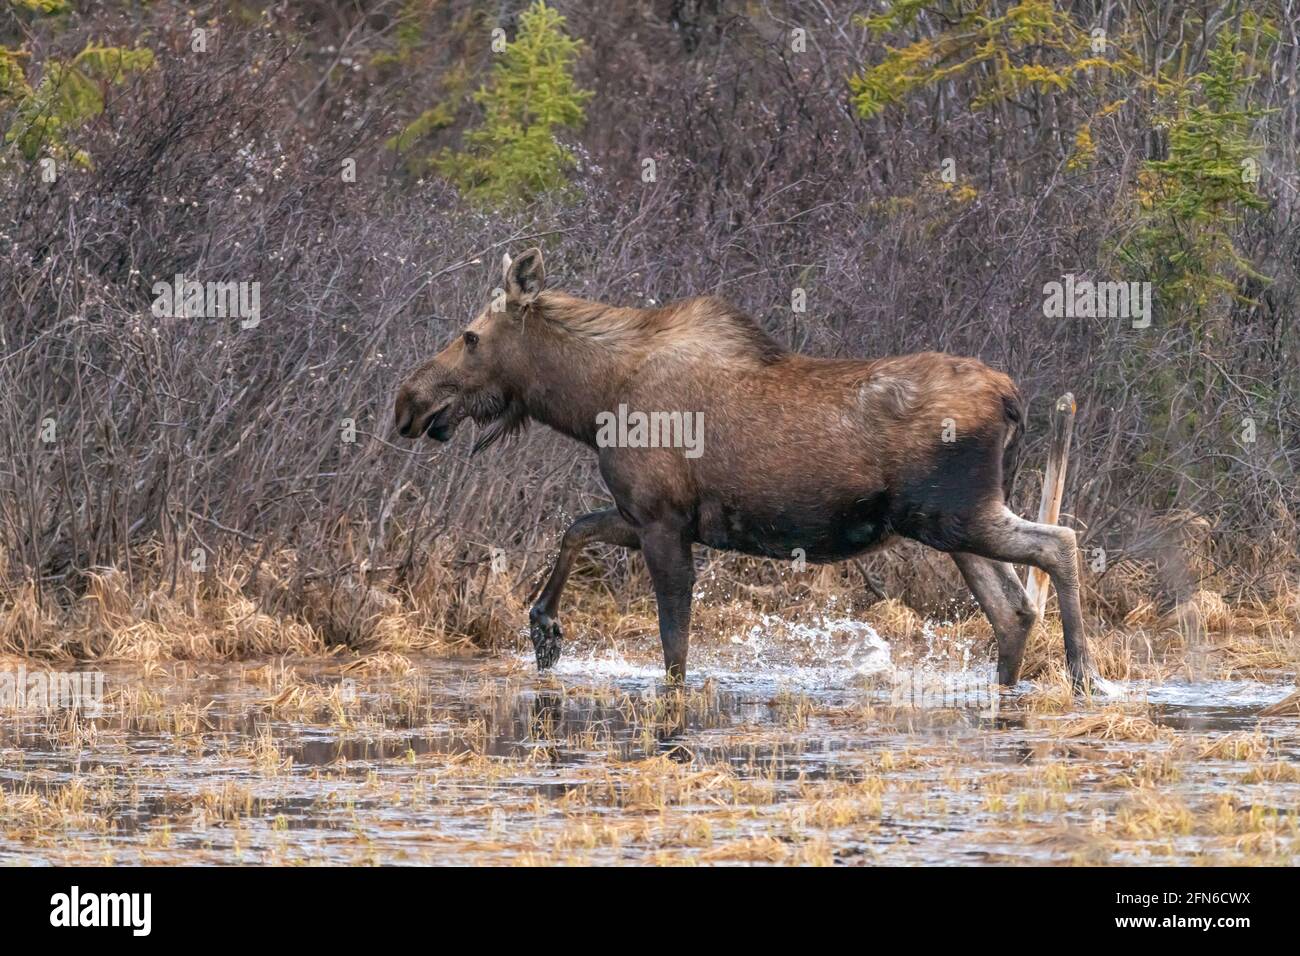 A large moose seen along the Alaska Highway in spring time walking through marsh landscape in natural, wild environment. Stock Photo